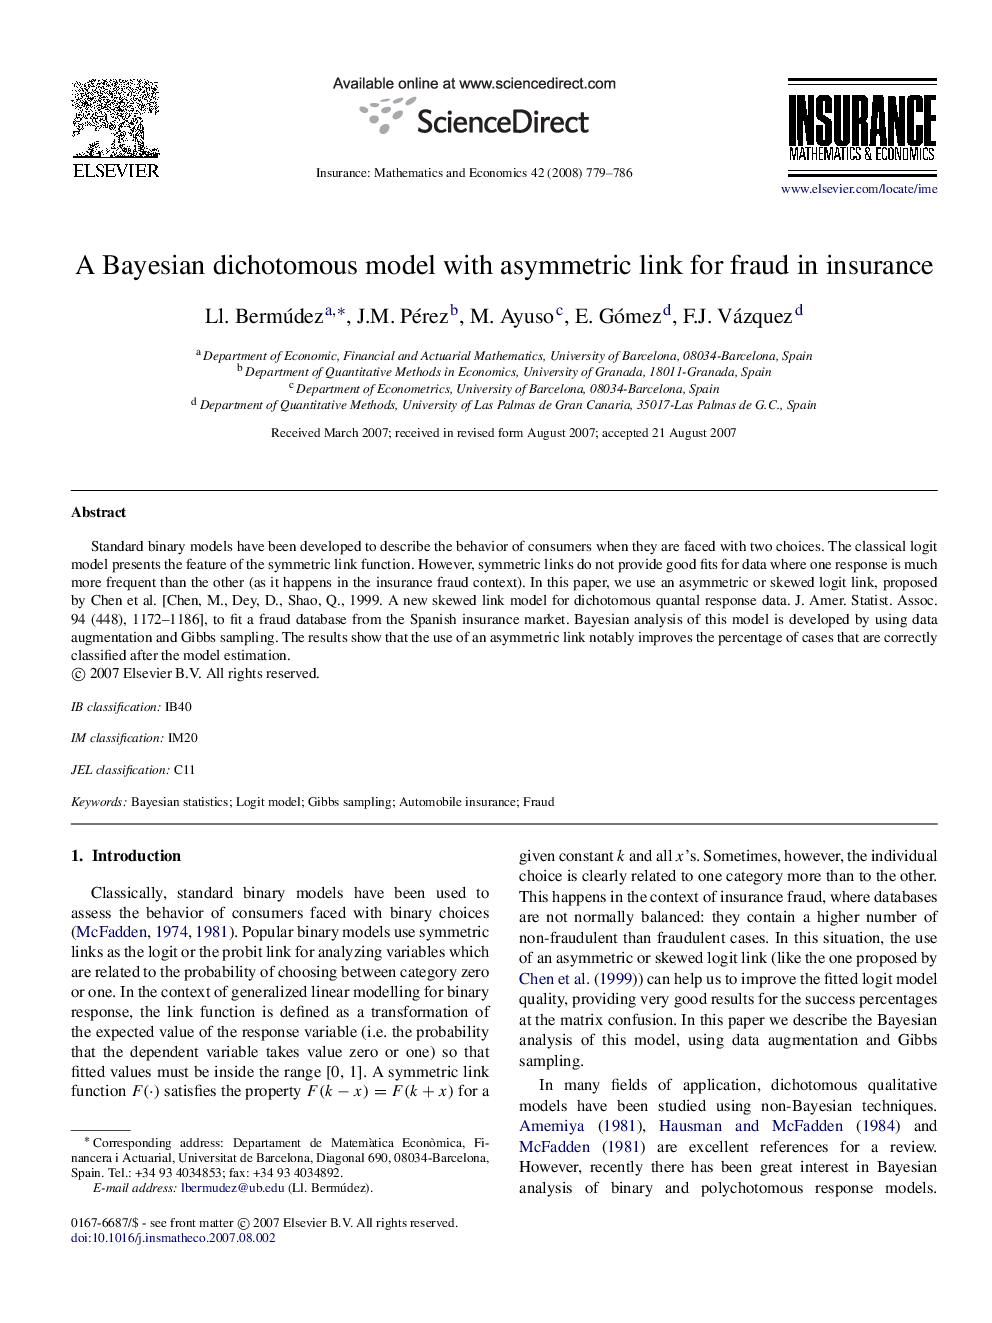 A Bayesian dichotomous model with asymmetric link for fraud in insurance